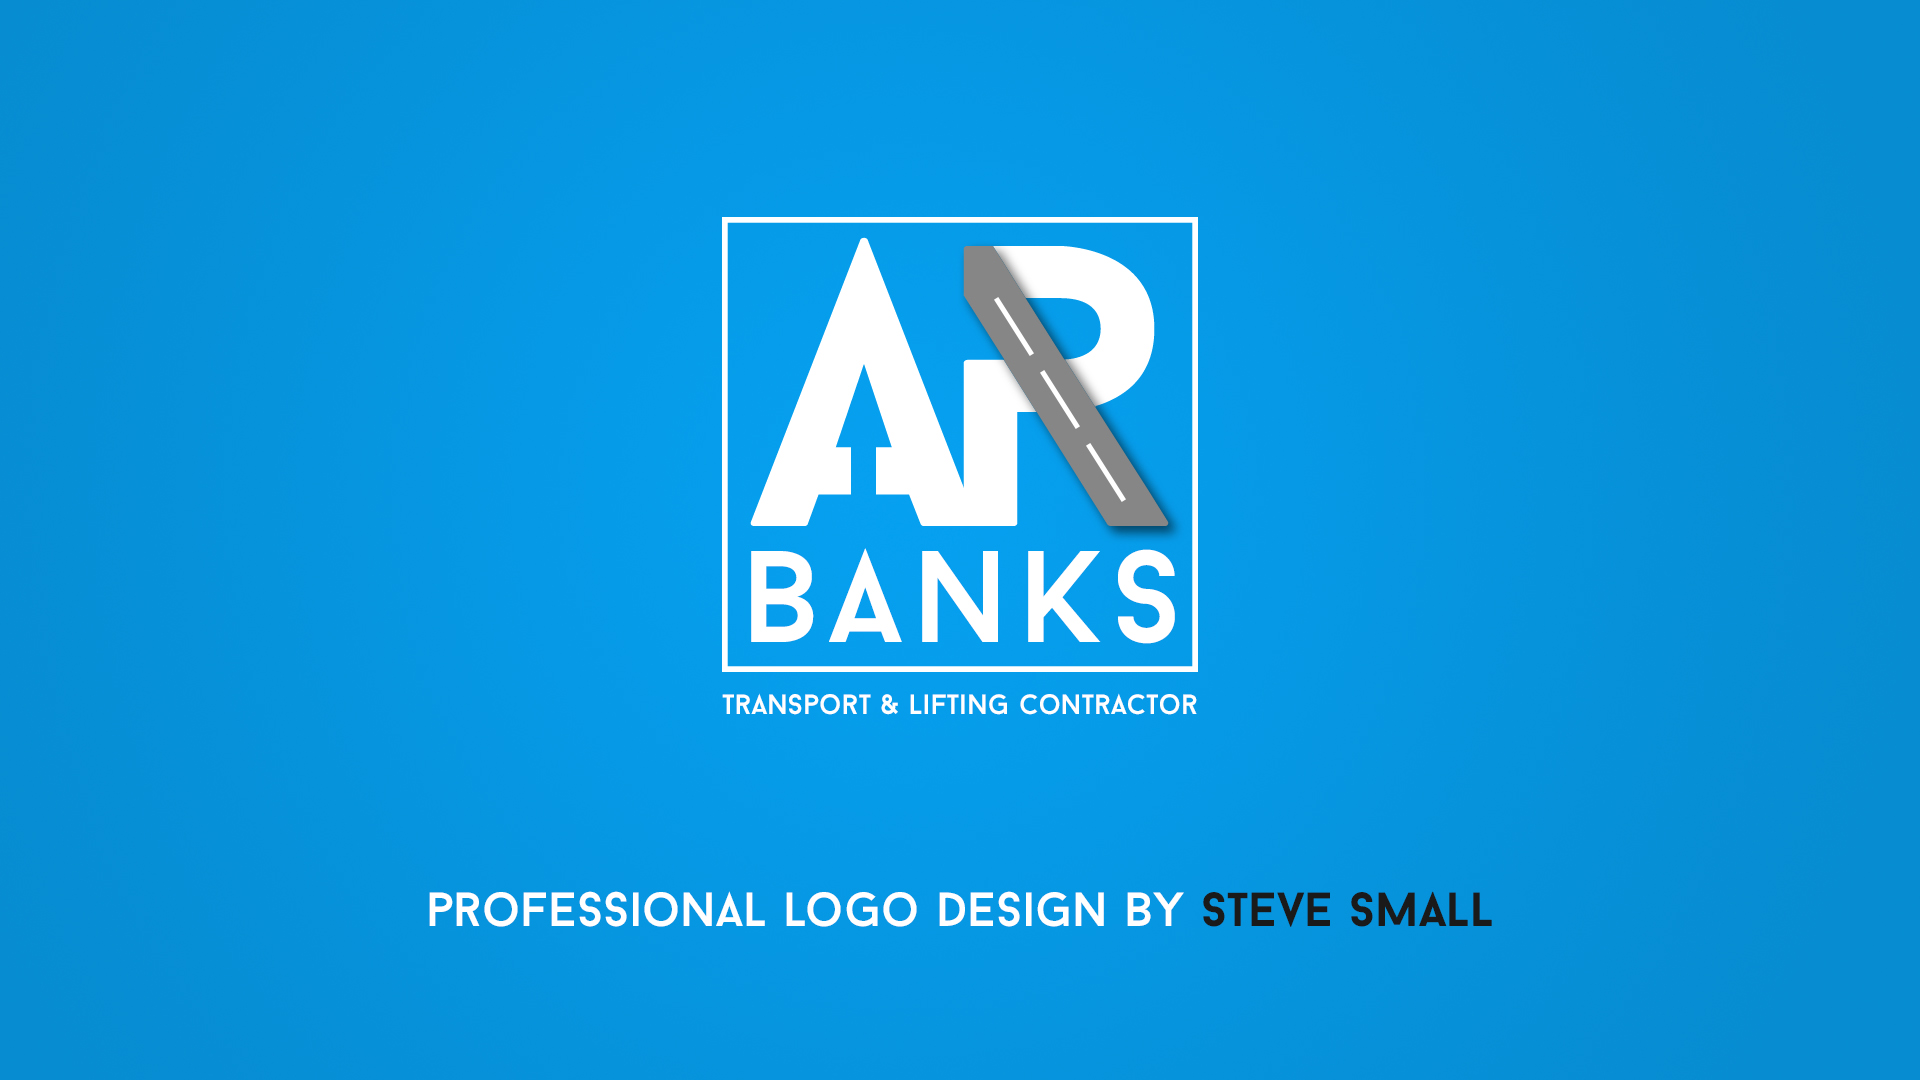 Professional Logo Design by Steve Small, Professional Branding, The Tiny Creative Co, logo design for transport company